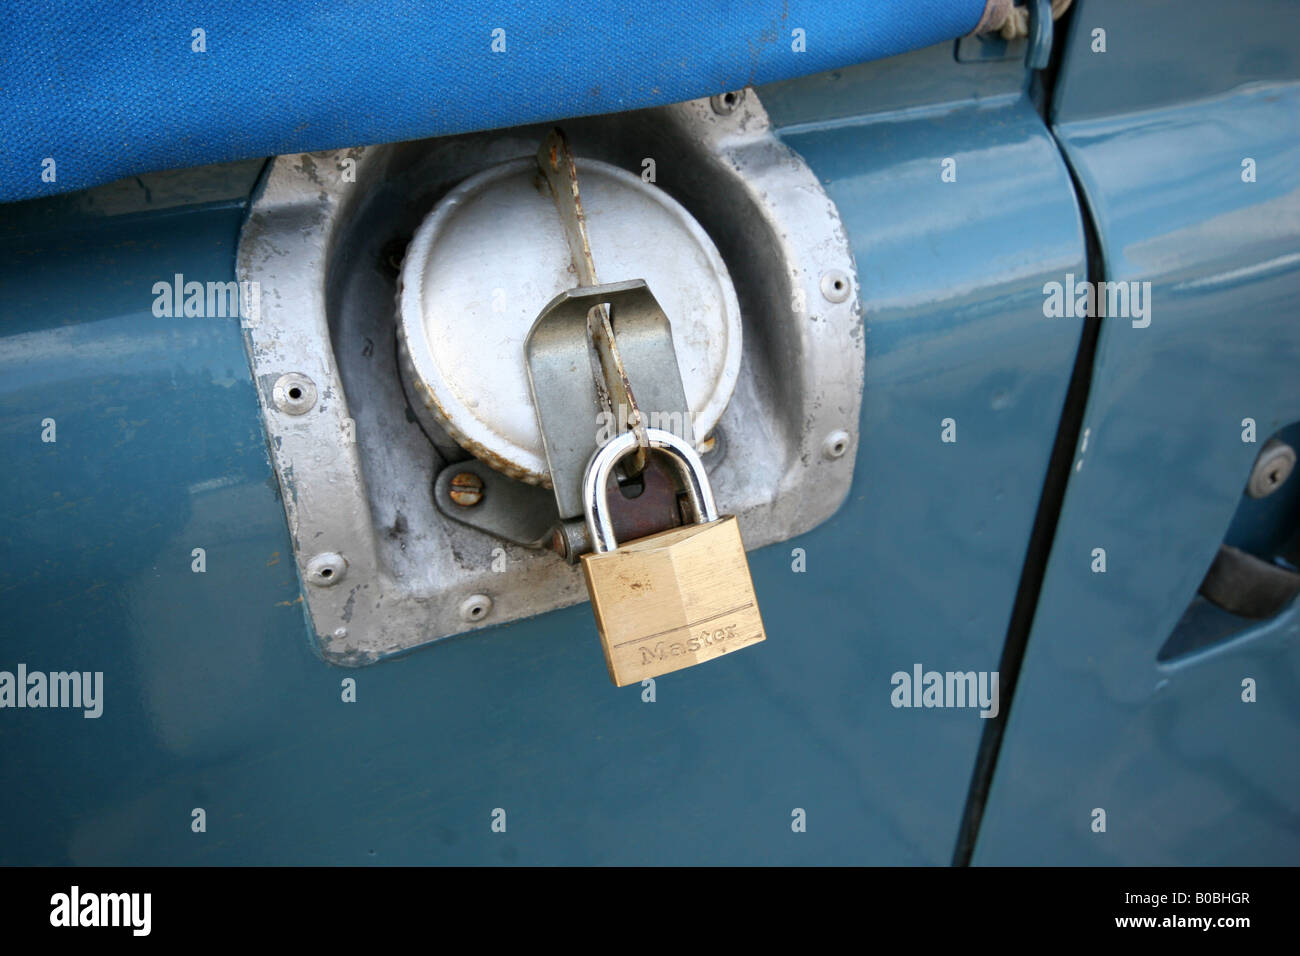 Locking fuel cap fitted to Landrover for security using standard brass padlock. Stock Photo